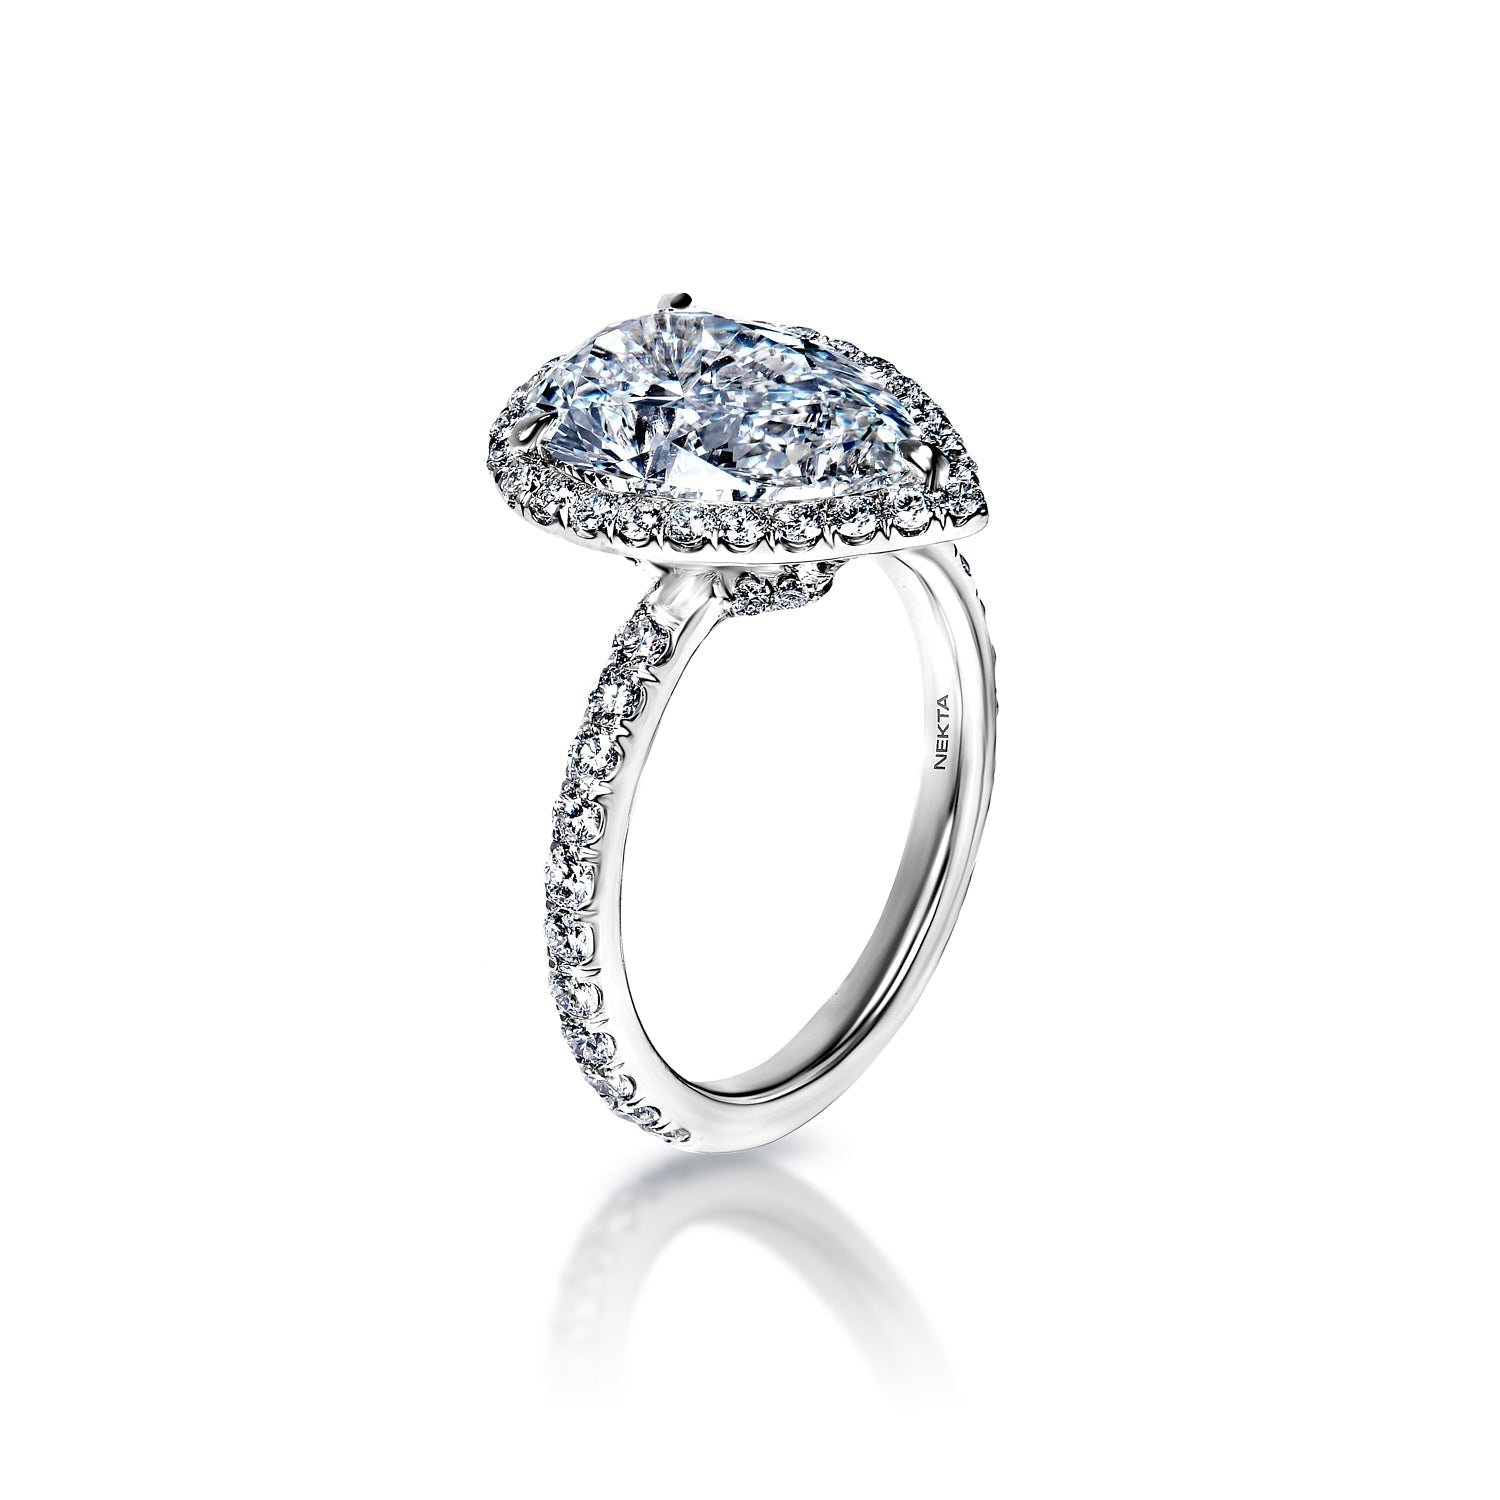 Janelle 5 Carat F VS1 Pear Shape Diamond Engagement Ring in Platinum Side View